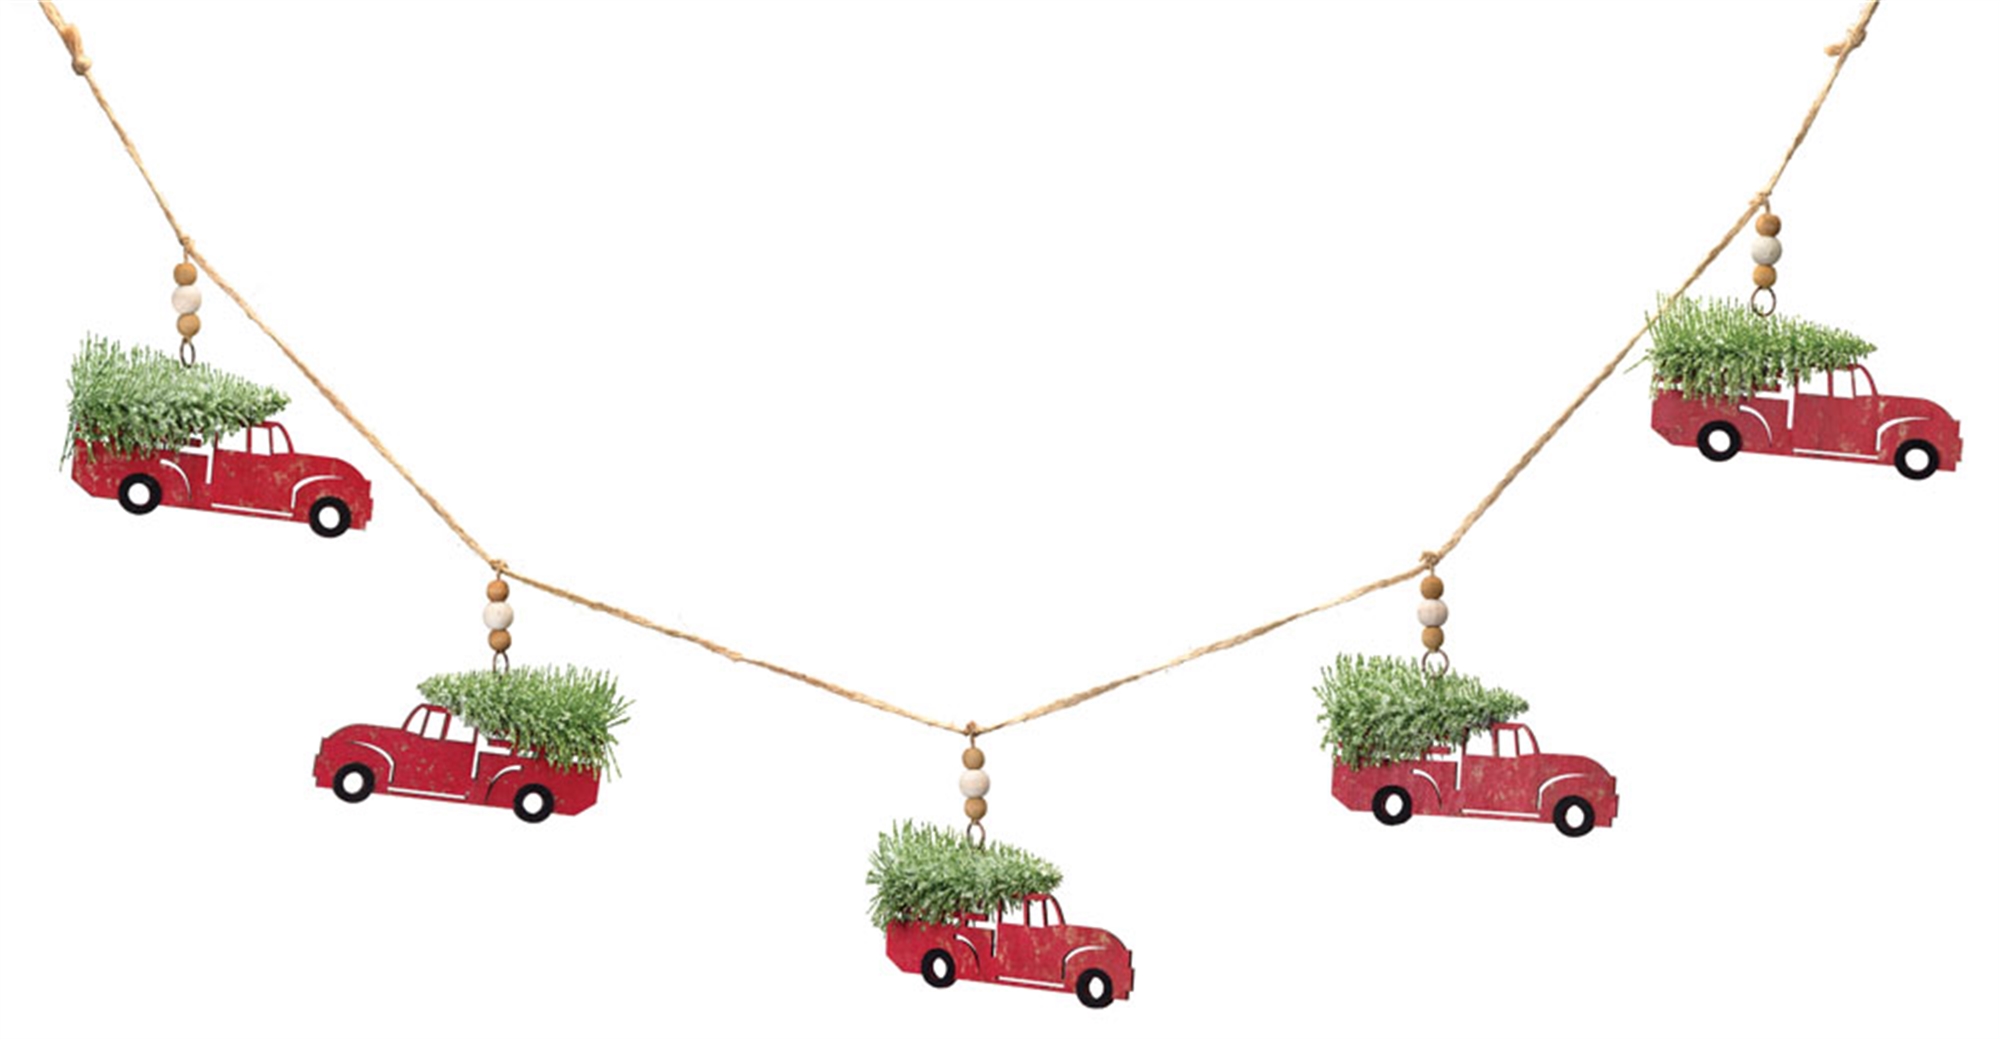 Truck and Tree Garland 4.5'L (Set of 2) Plastic